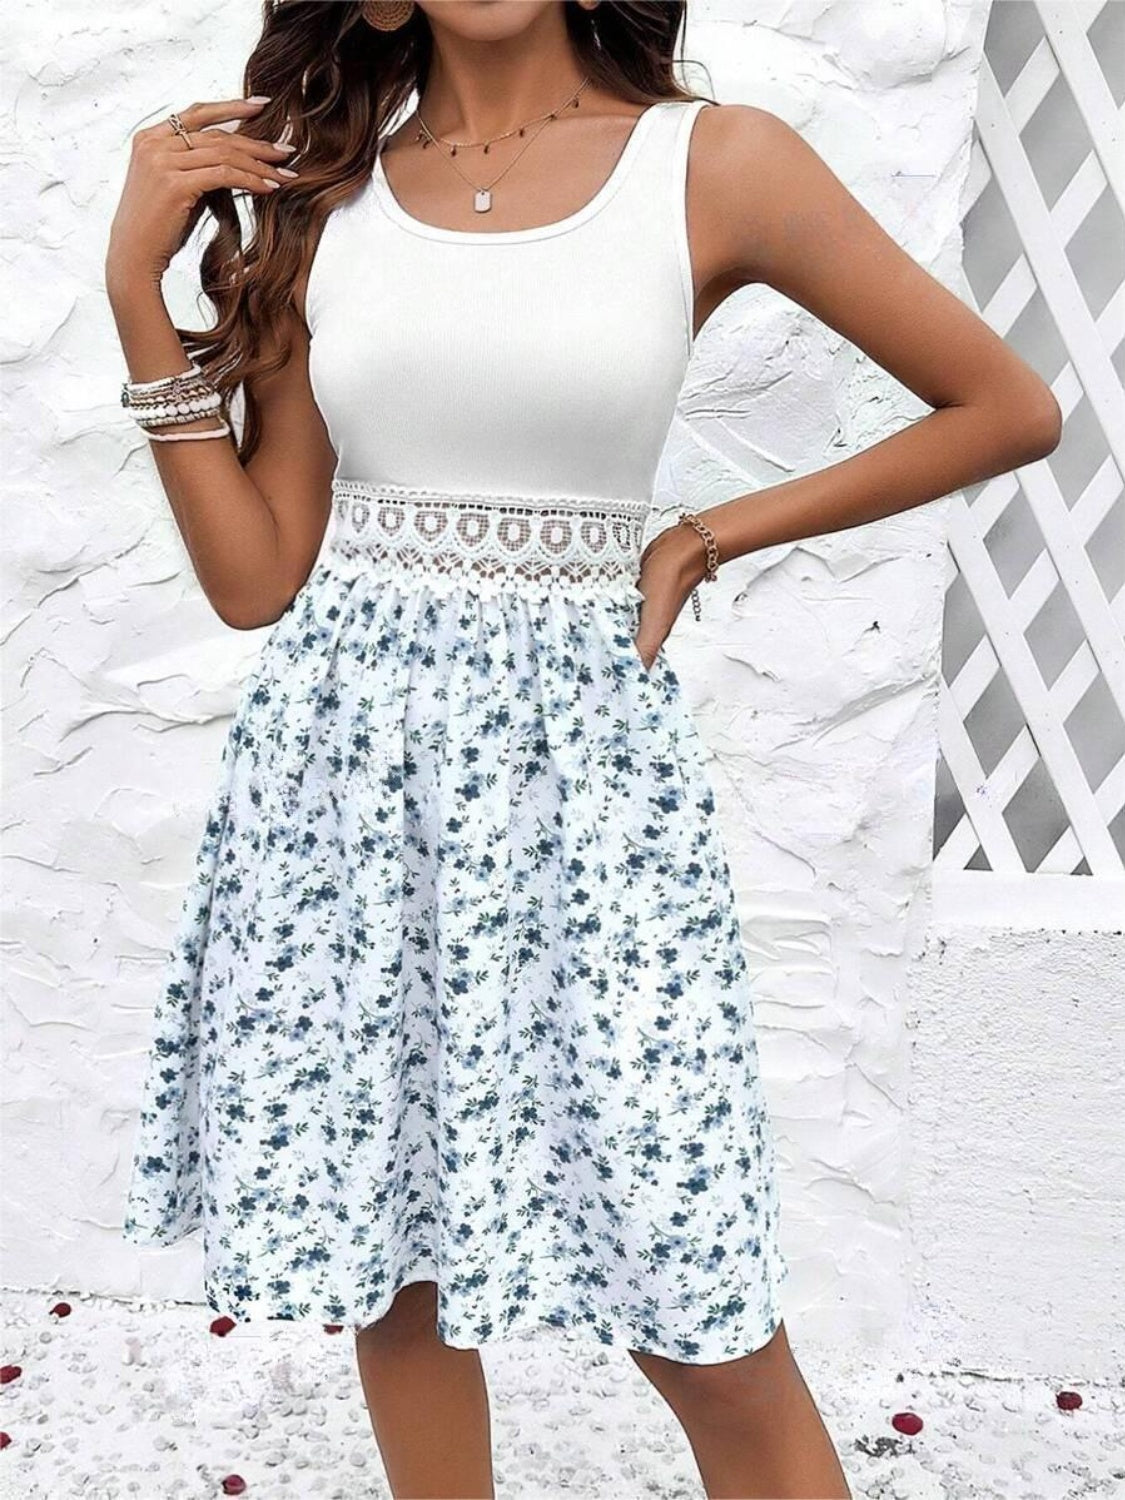 Lace Detail Floral Round Neck Sleeveless Dress White S 